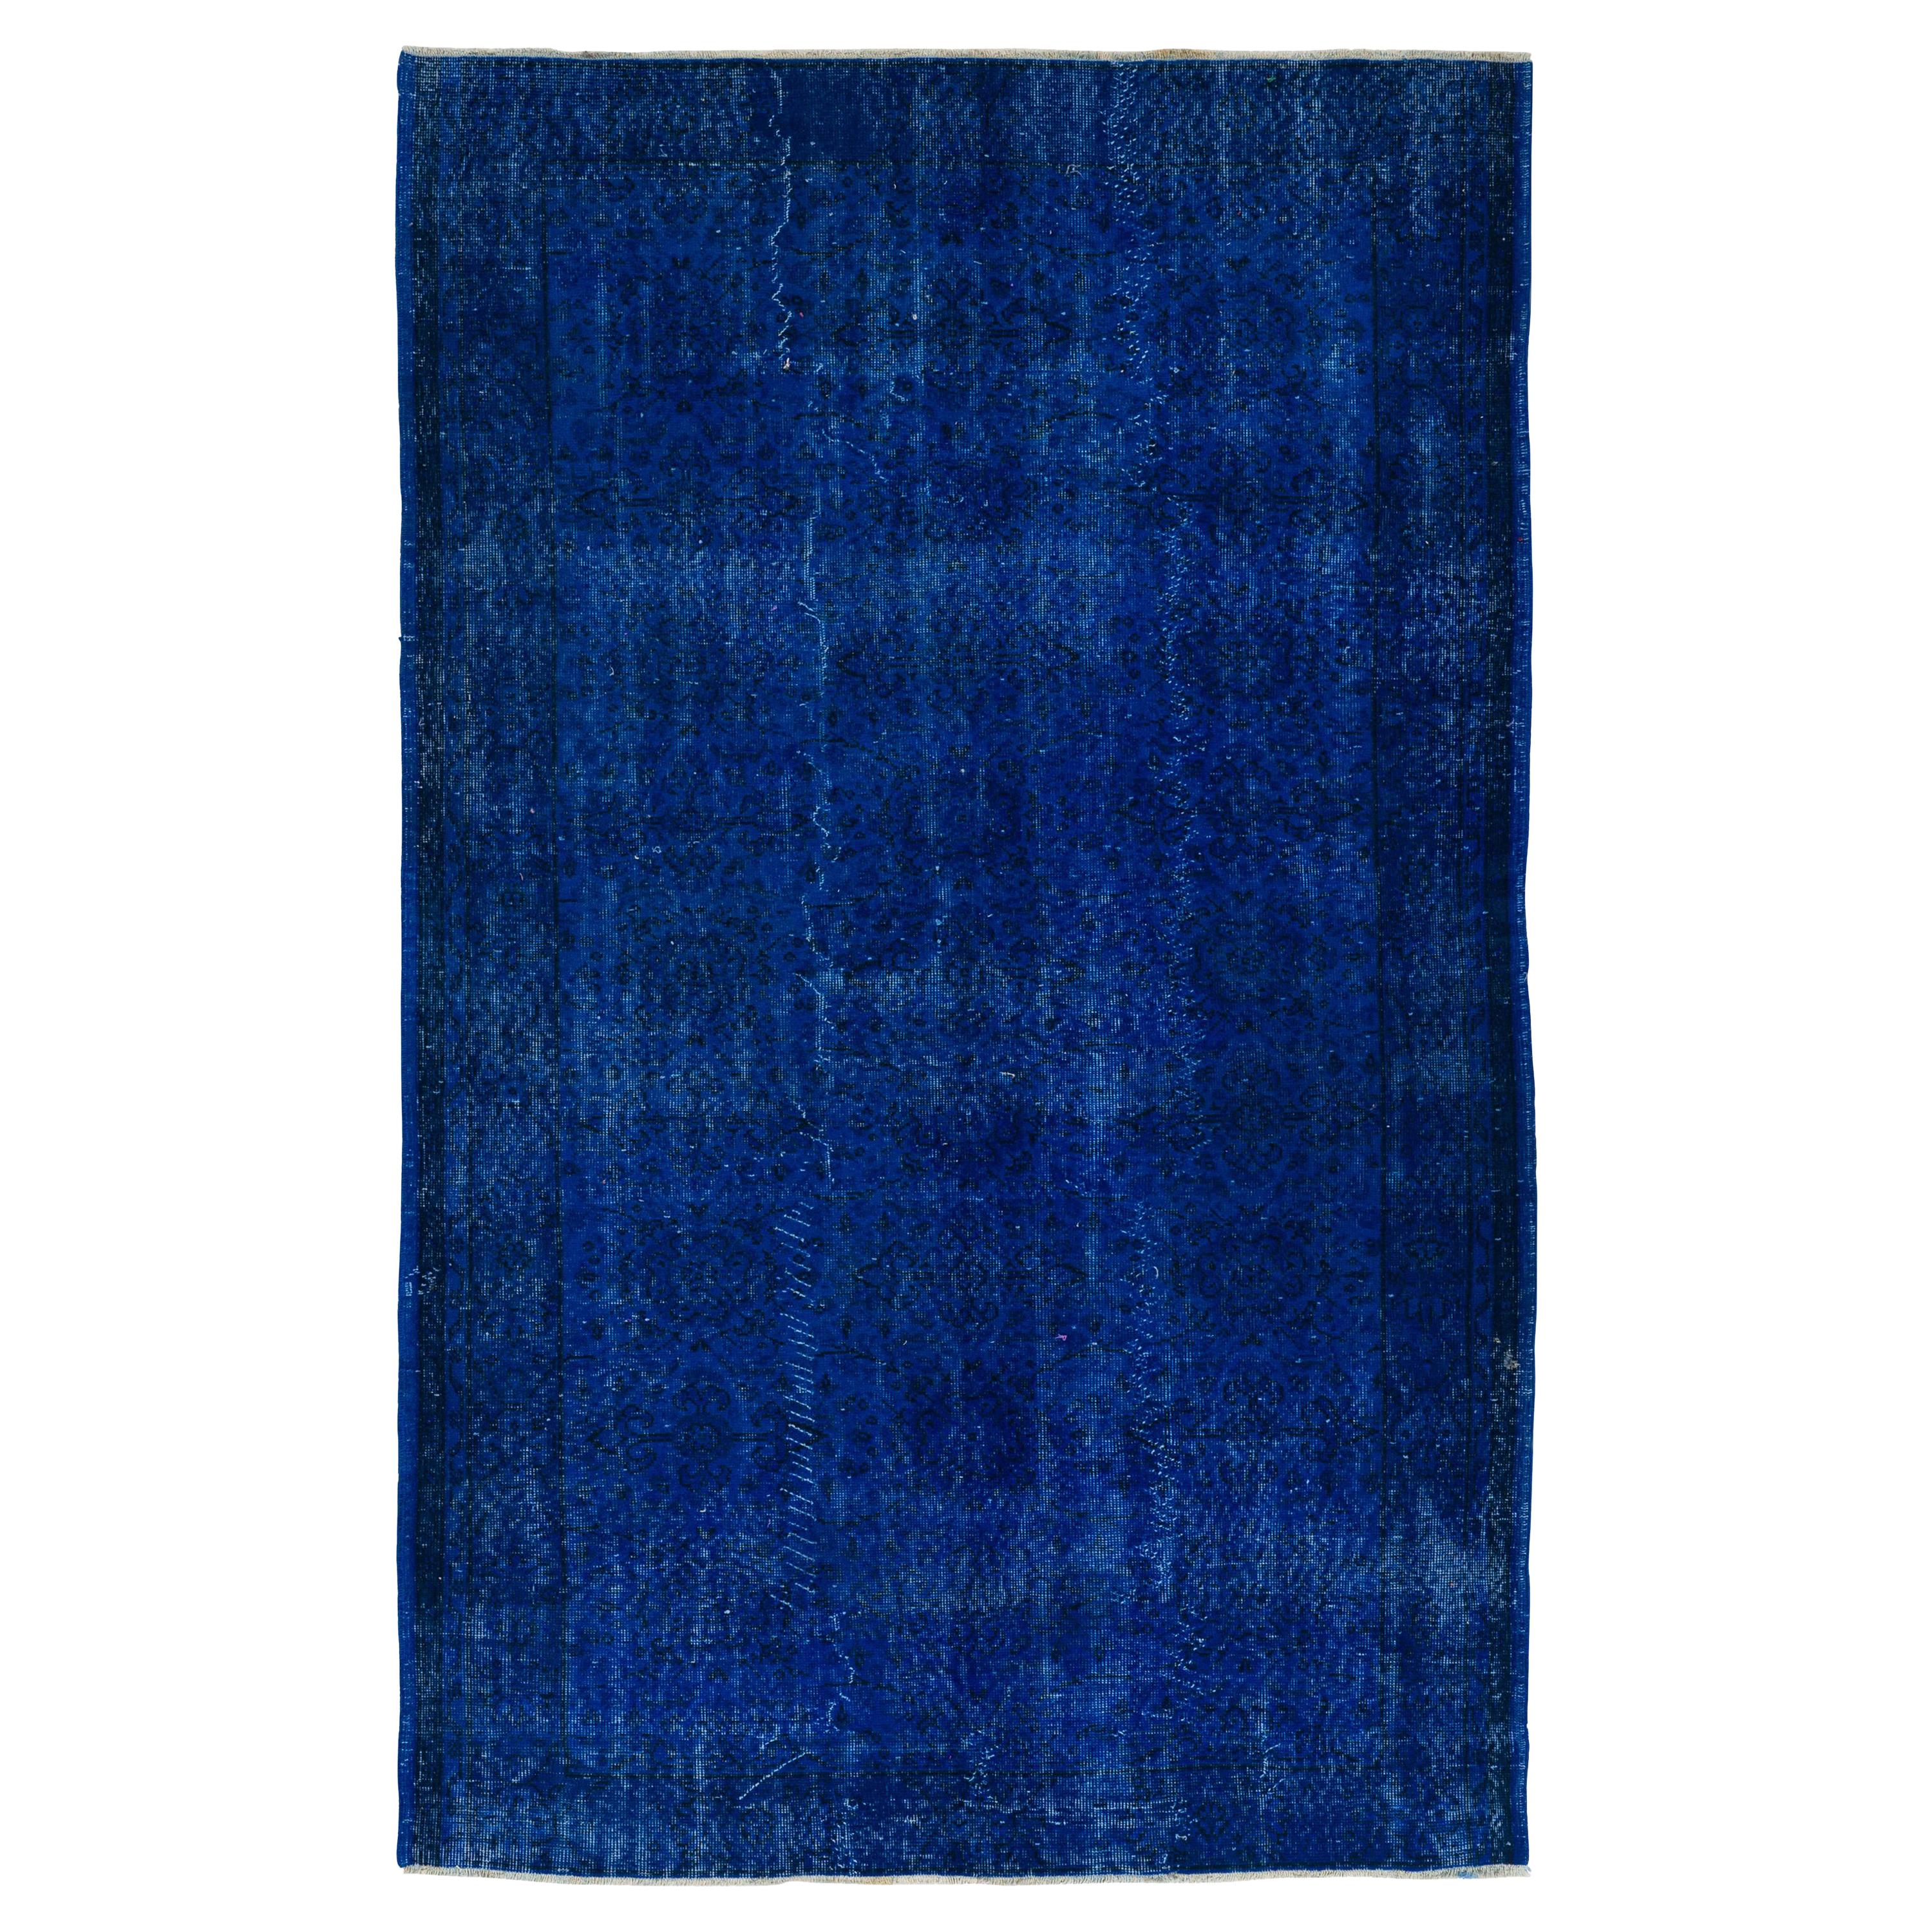 Vintage Rug Over-Dyed in Blue Color, 5.5x8.7 Ft Great for Contemporary Interiors